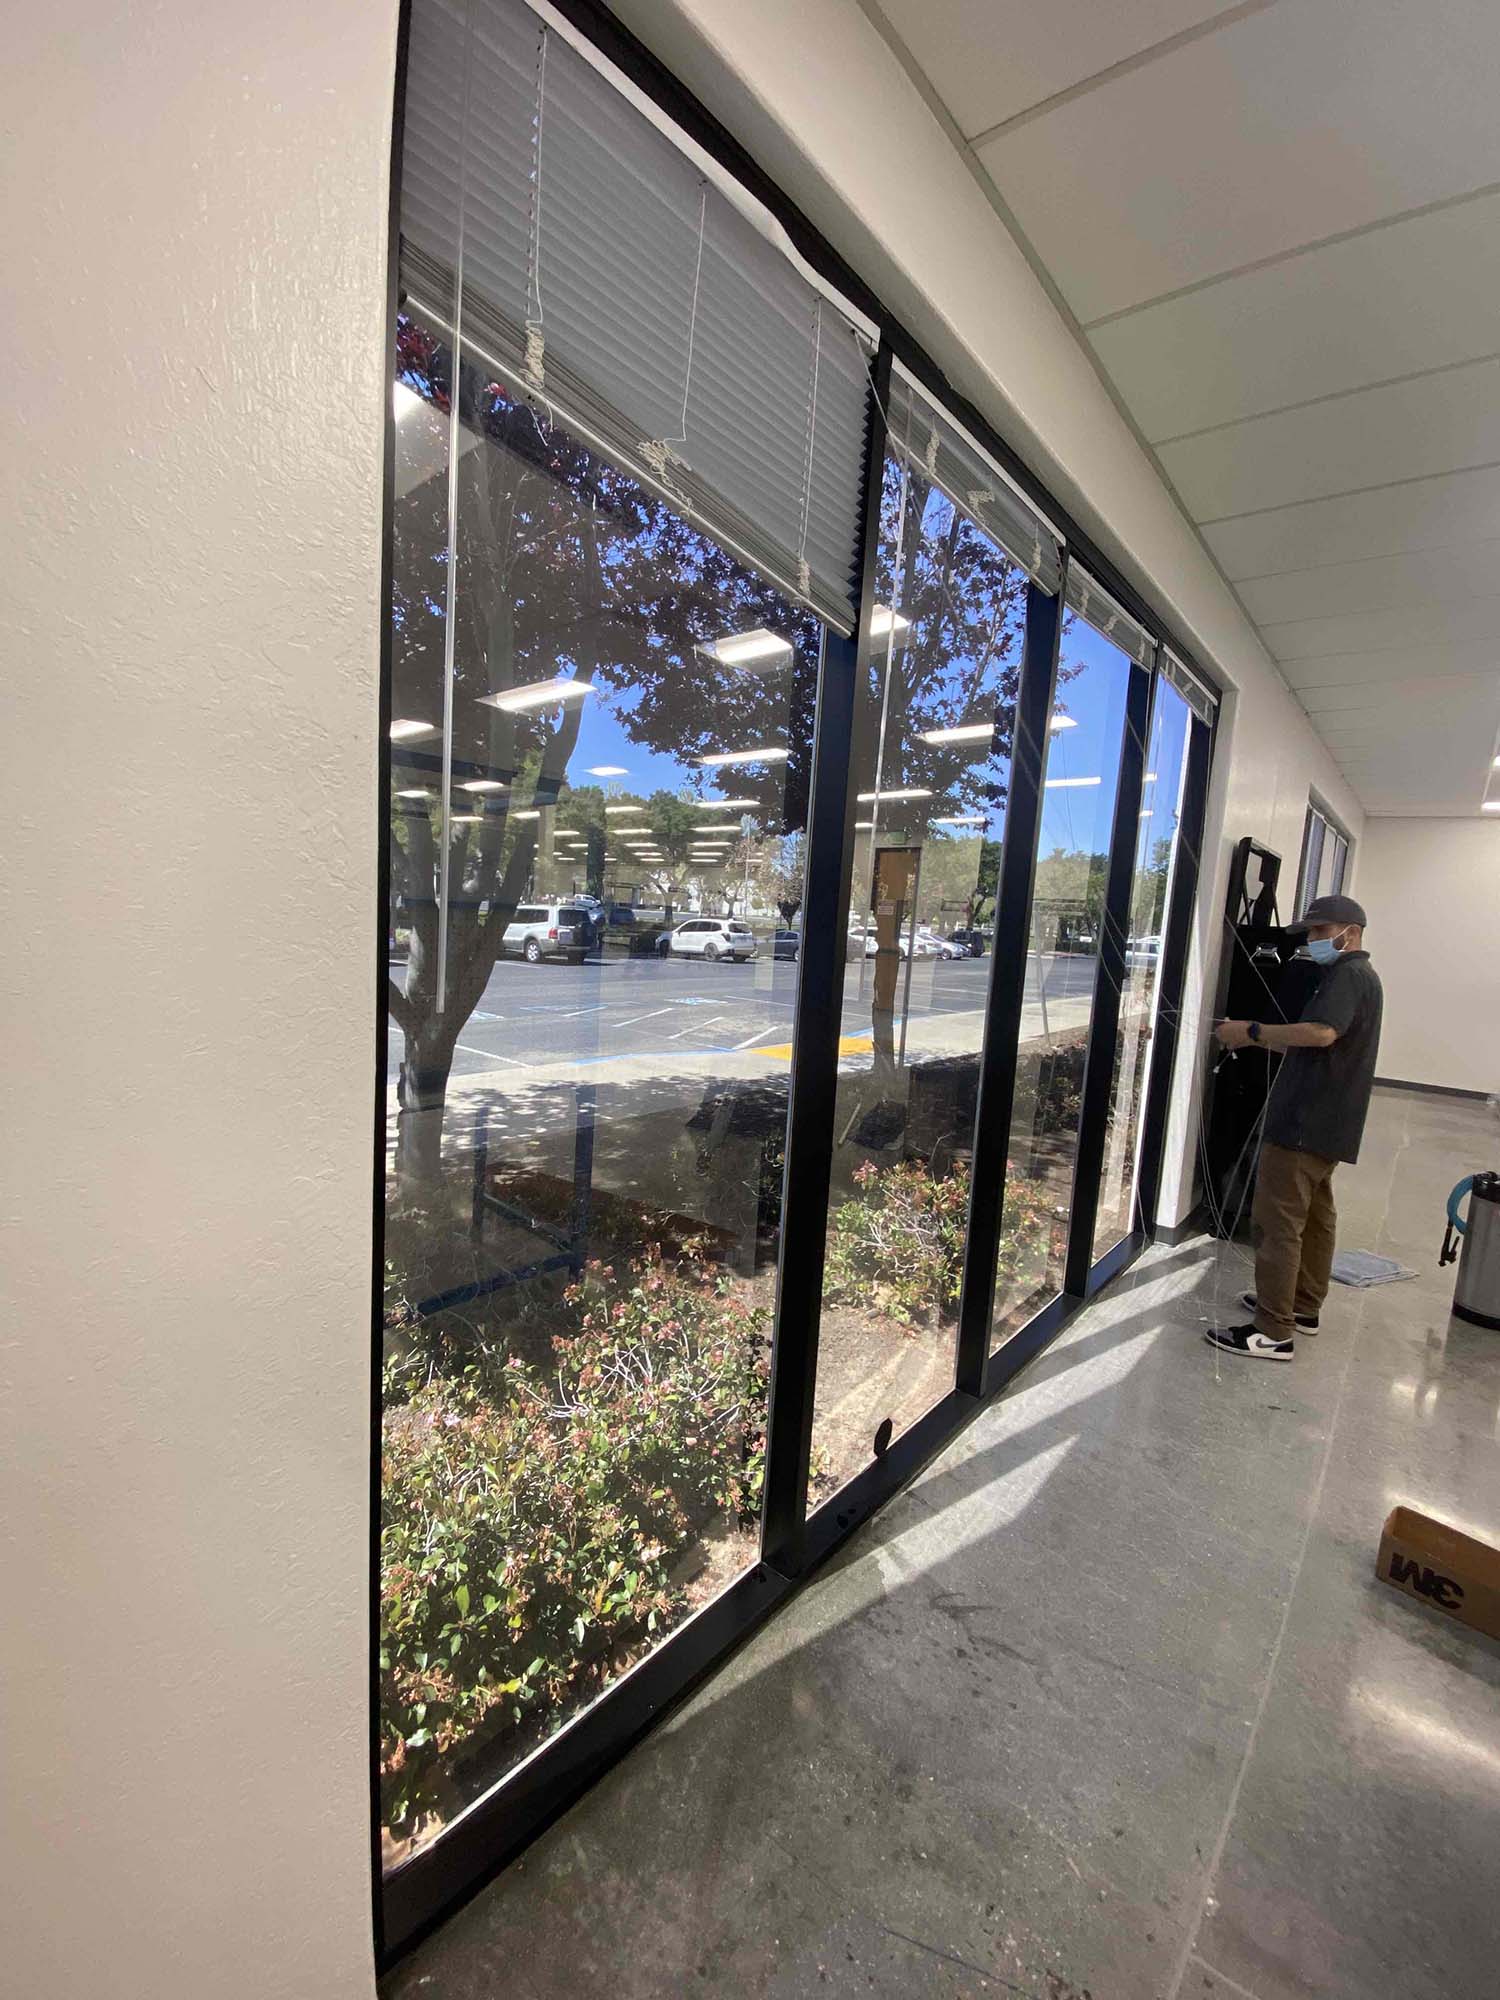 Looking for an affordable and effective window film? Look no further than 3M Affinity Window Film. The ClimatePro team recently Installed it on the windows of this office in San Jose, CA.